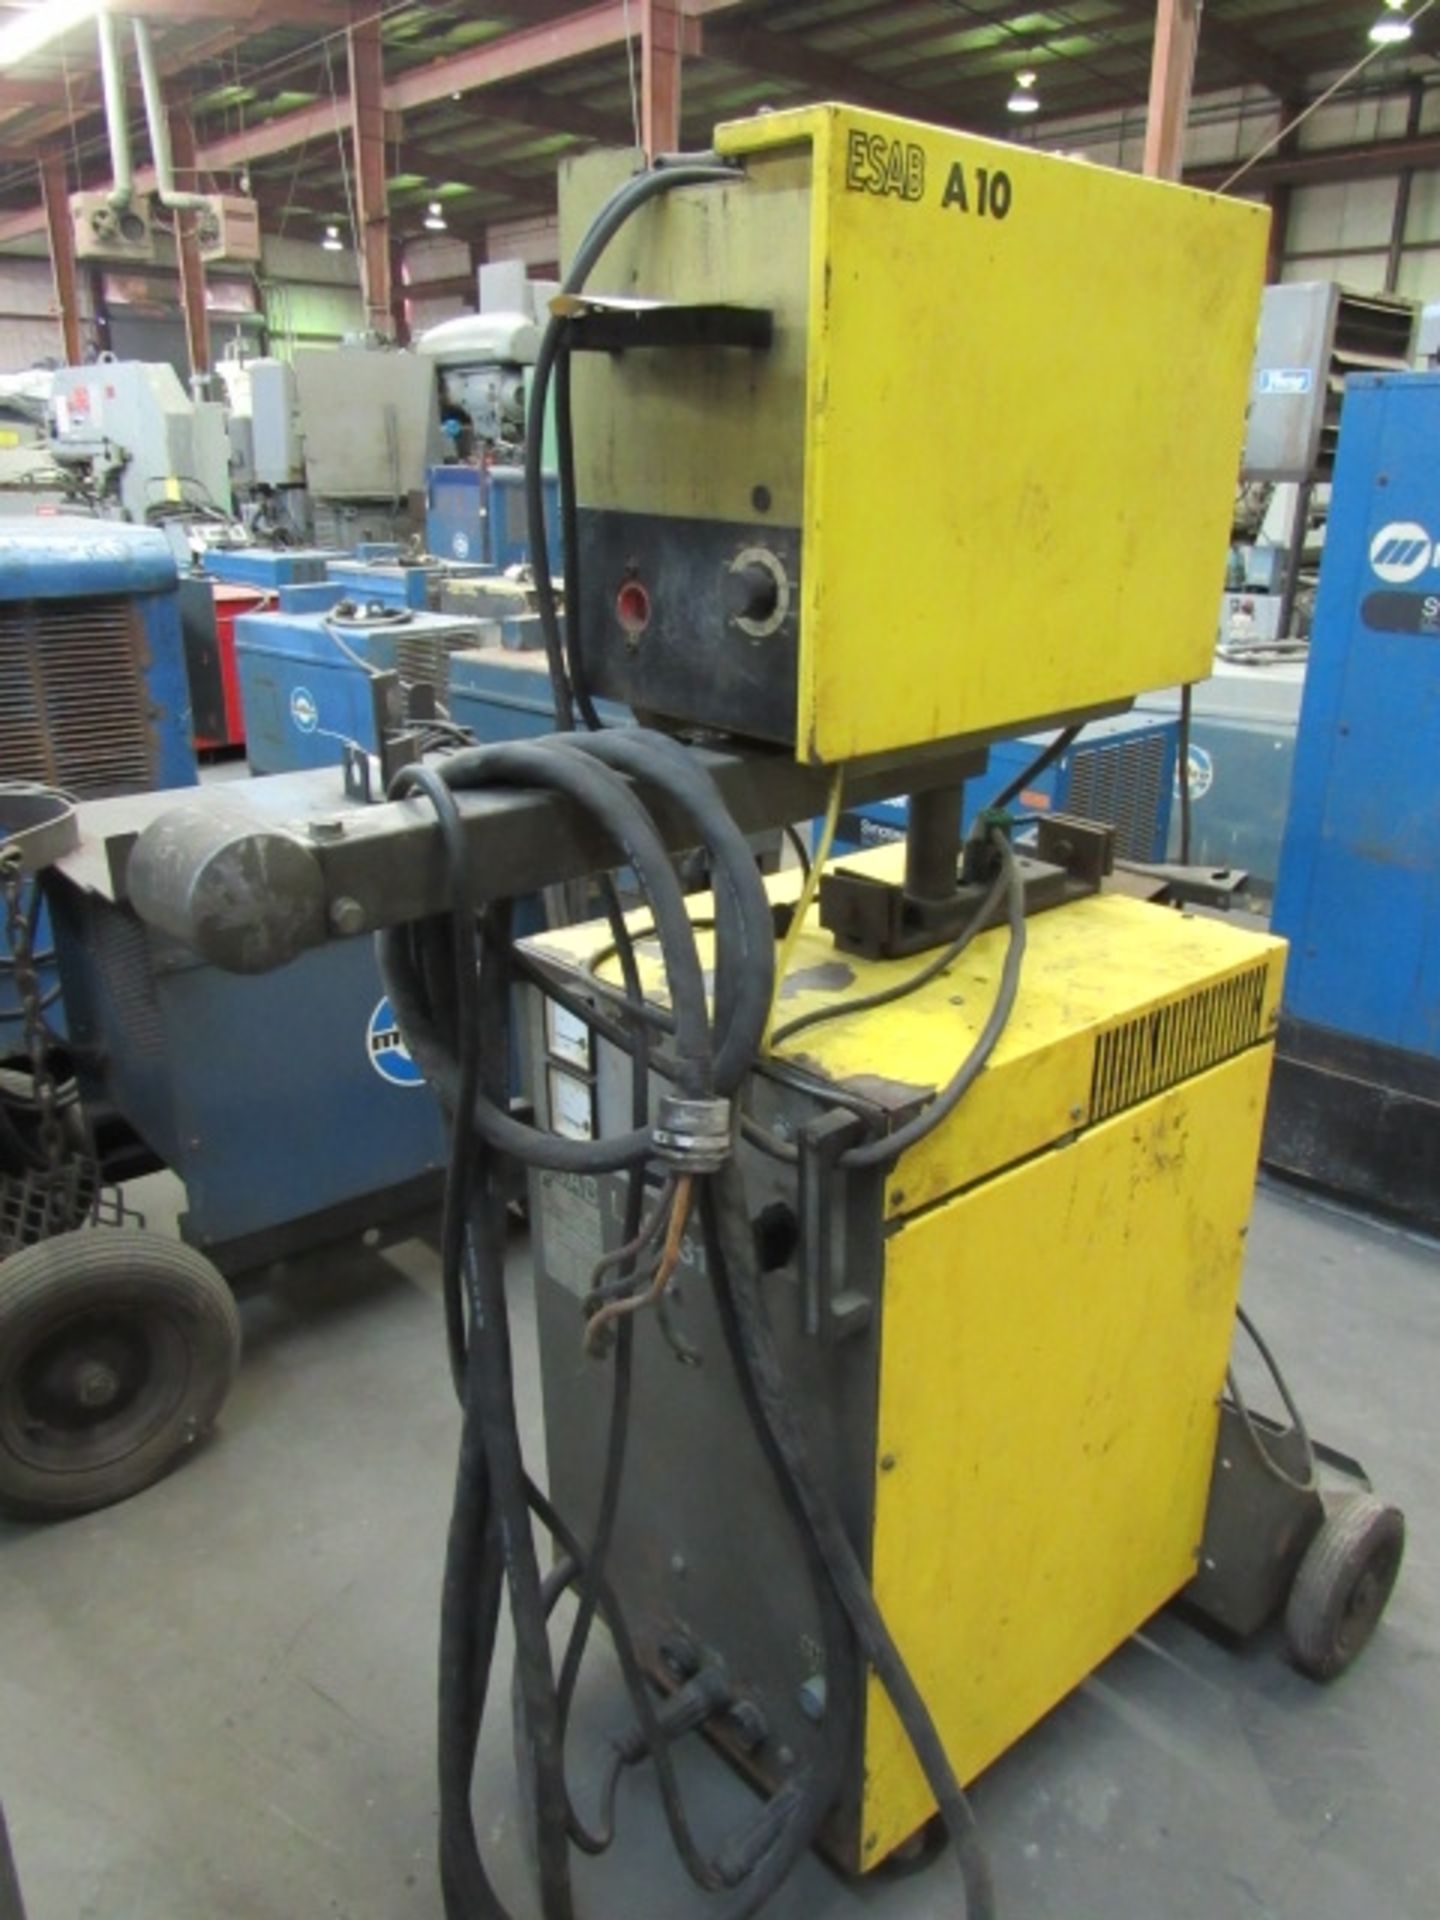 WIRE FEEDER, ESAB A/O MDL. A10-MVC30, 400 amps welding current, 60% max. duty factor, S/N 331-403- - Image 3 of 4